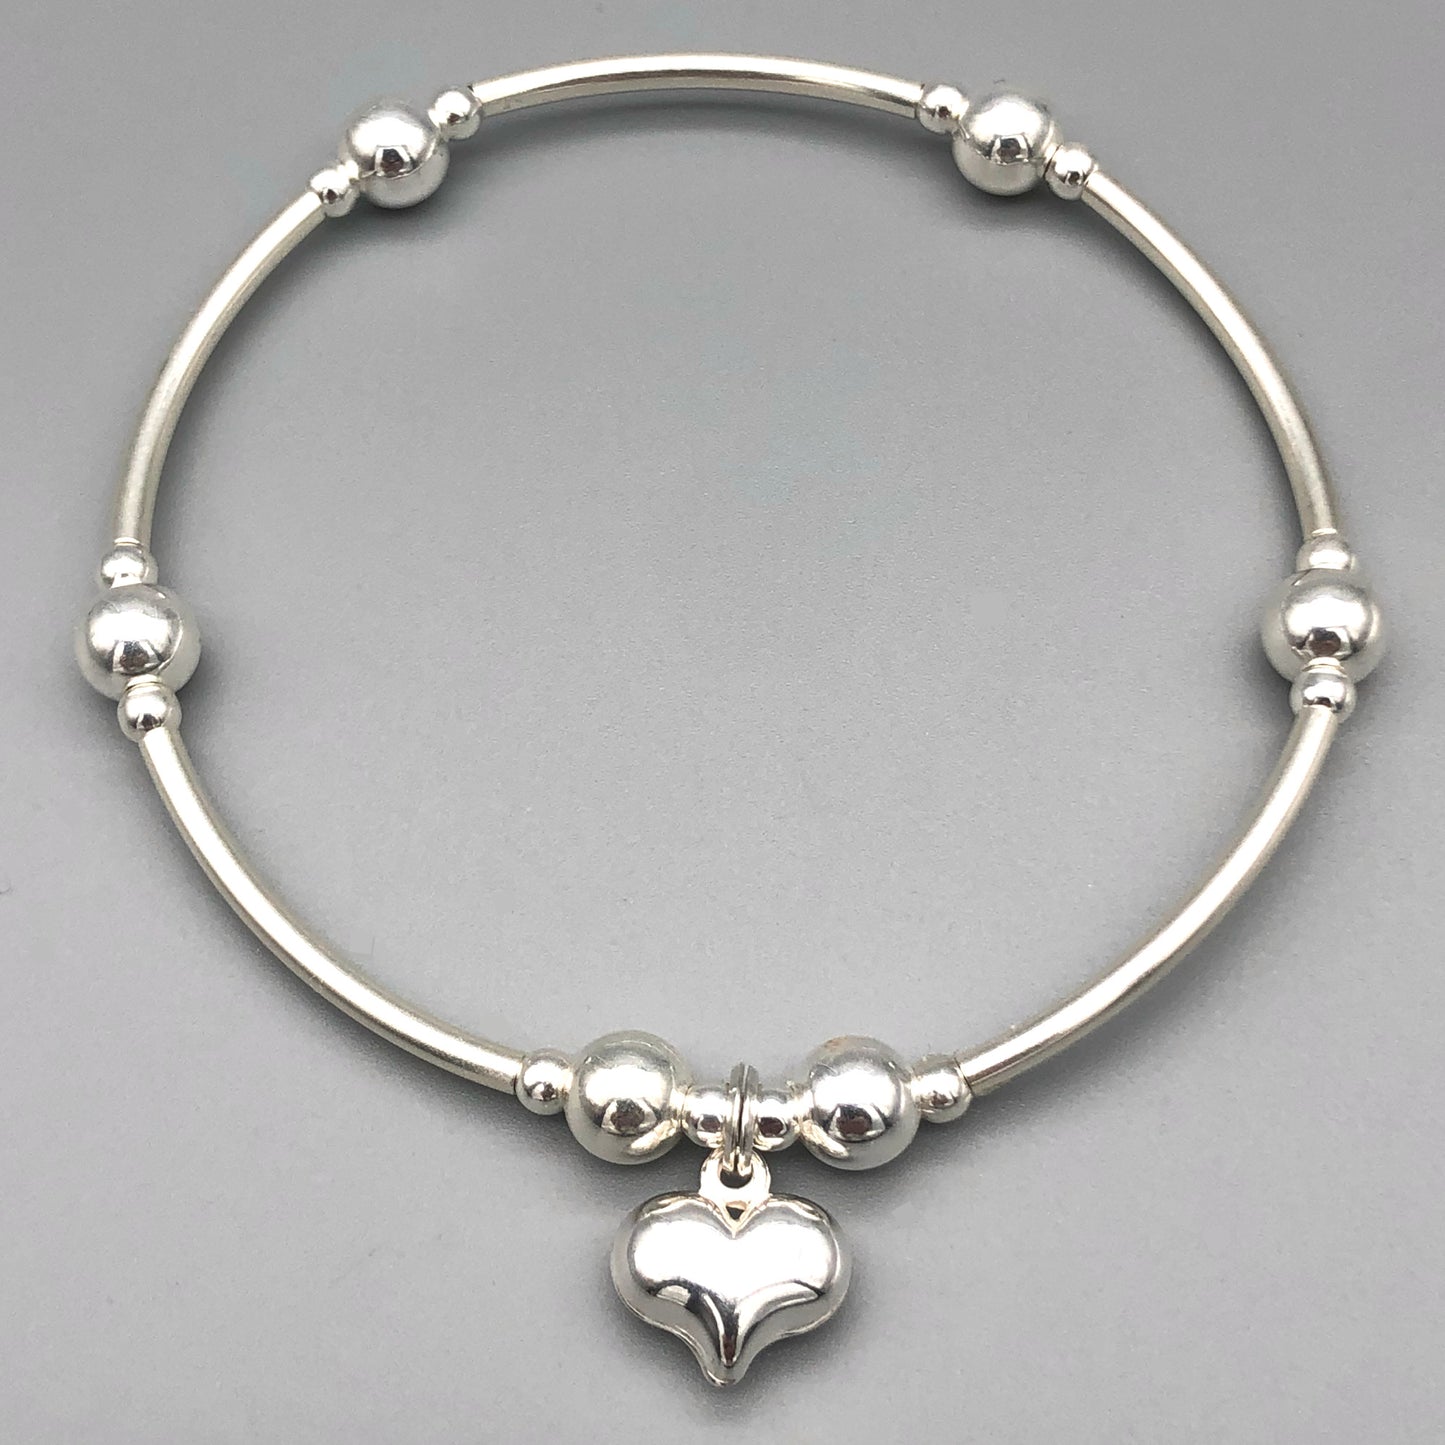 Puff heart charm sterling silver hand-made girl's stacking bracelet by My Silver Wish